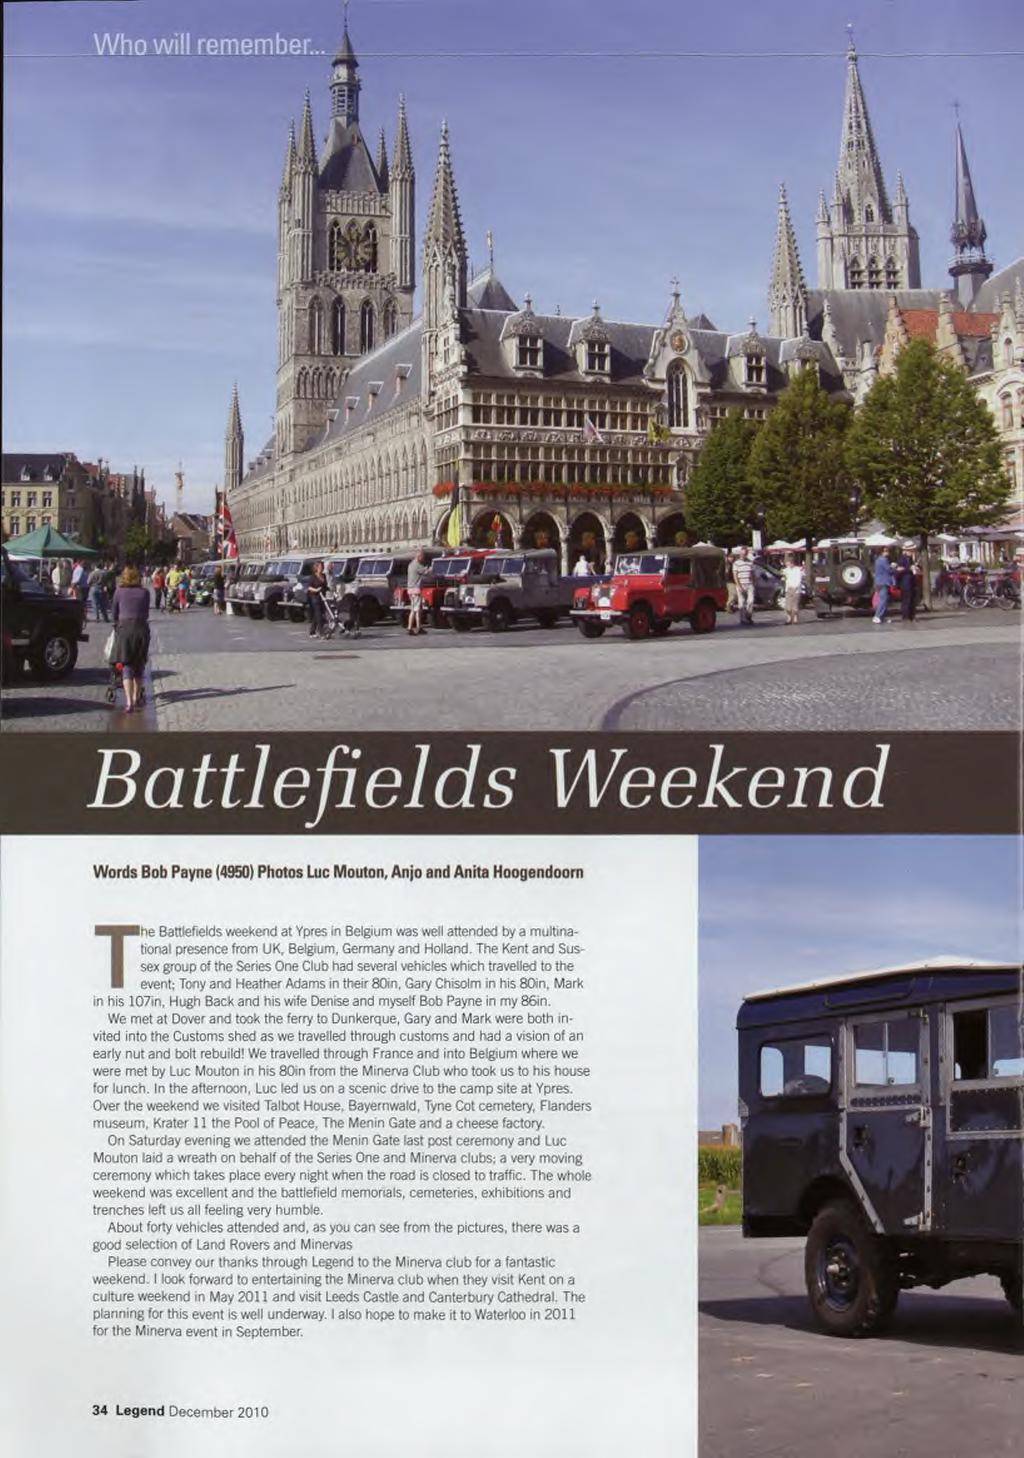 Who will reme Words Bob Payne (4950) Photos Luc Mouton, Anjo and Anita Hoogendoorn The Battlefields weekend at Ypres in Belgium was well attended by a multinational presence from UK, Belgium, Germany